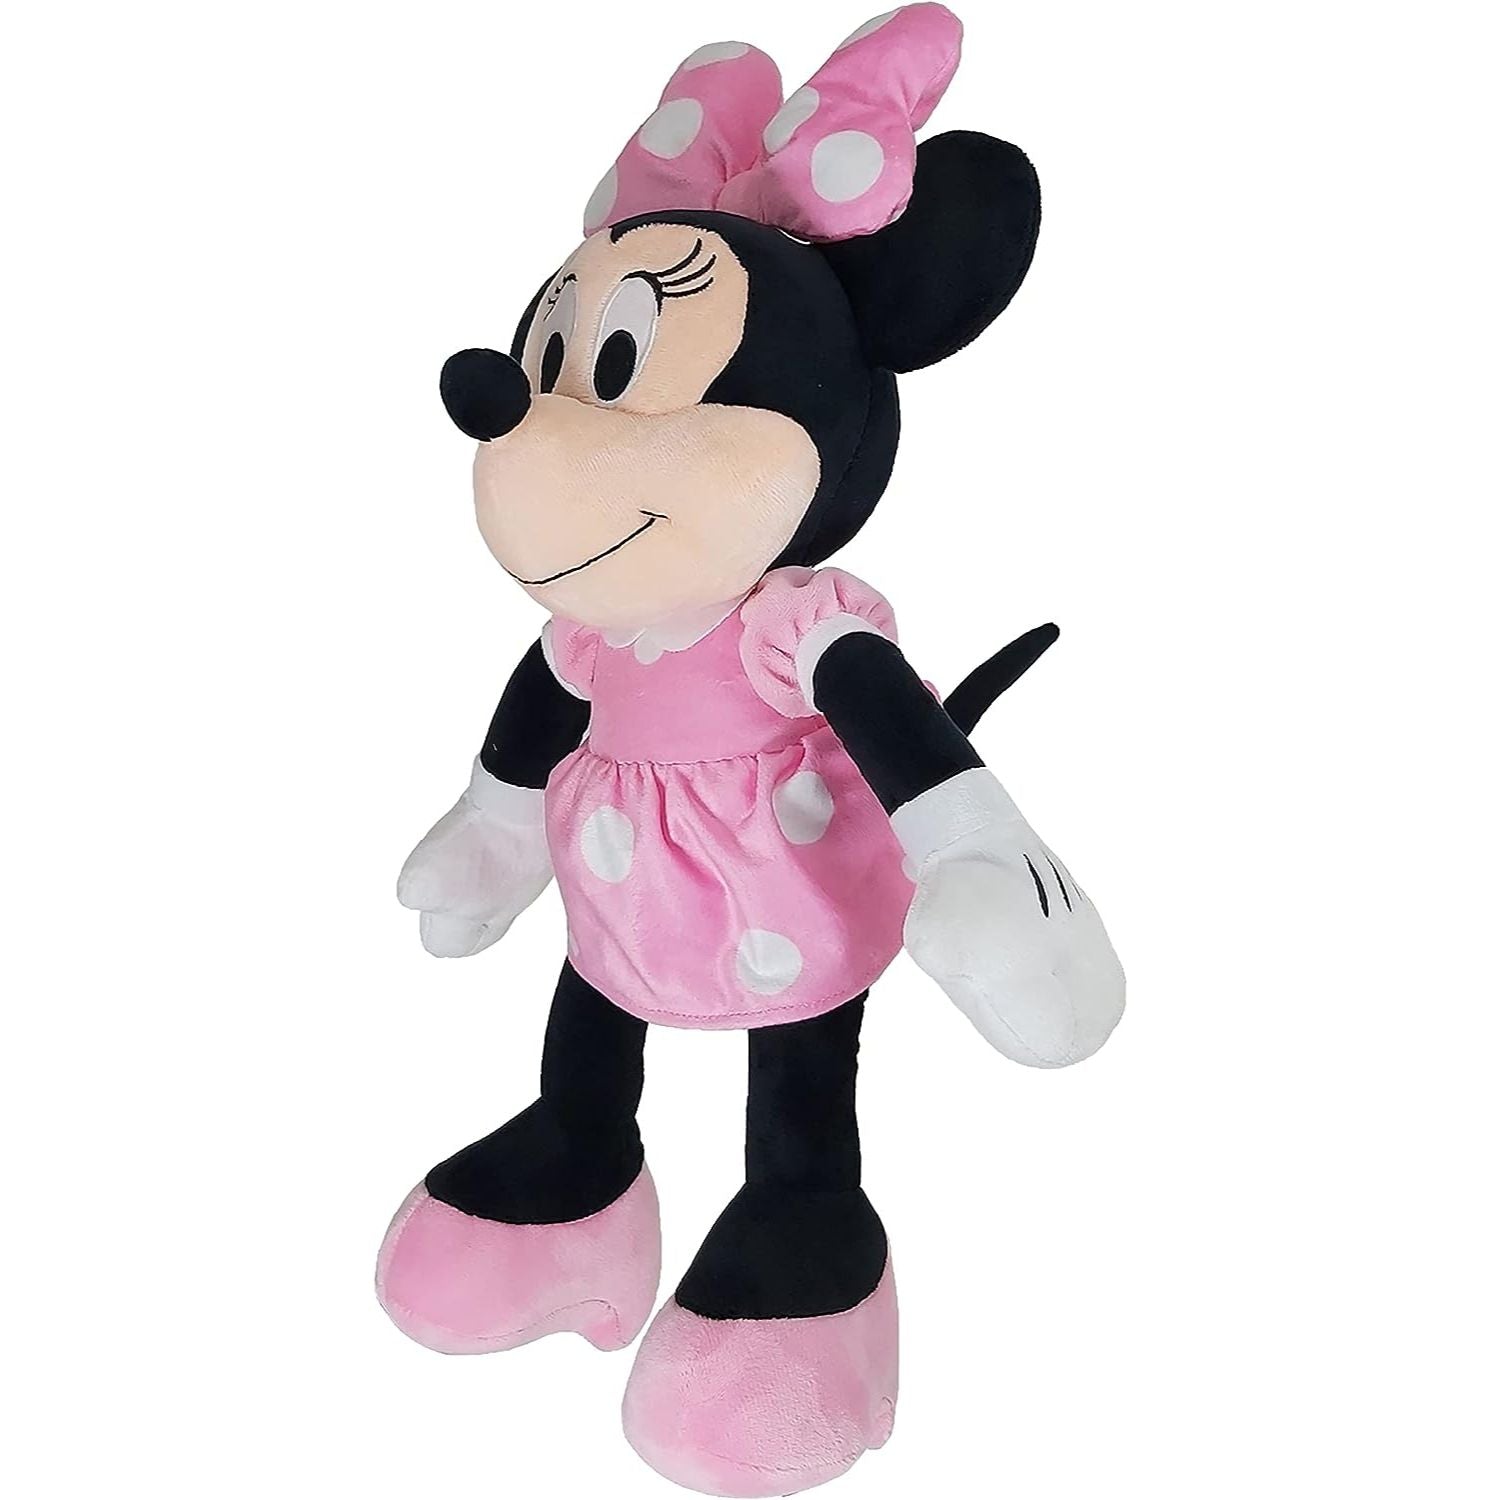 Disney Store Official Minnie Mouse Plush, Pink, 18 Inches, Mickey and  Friends, Iconic Cuddly Toy Character in Pink Polka Dot Dress and Bow with